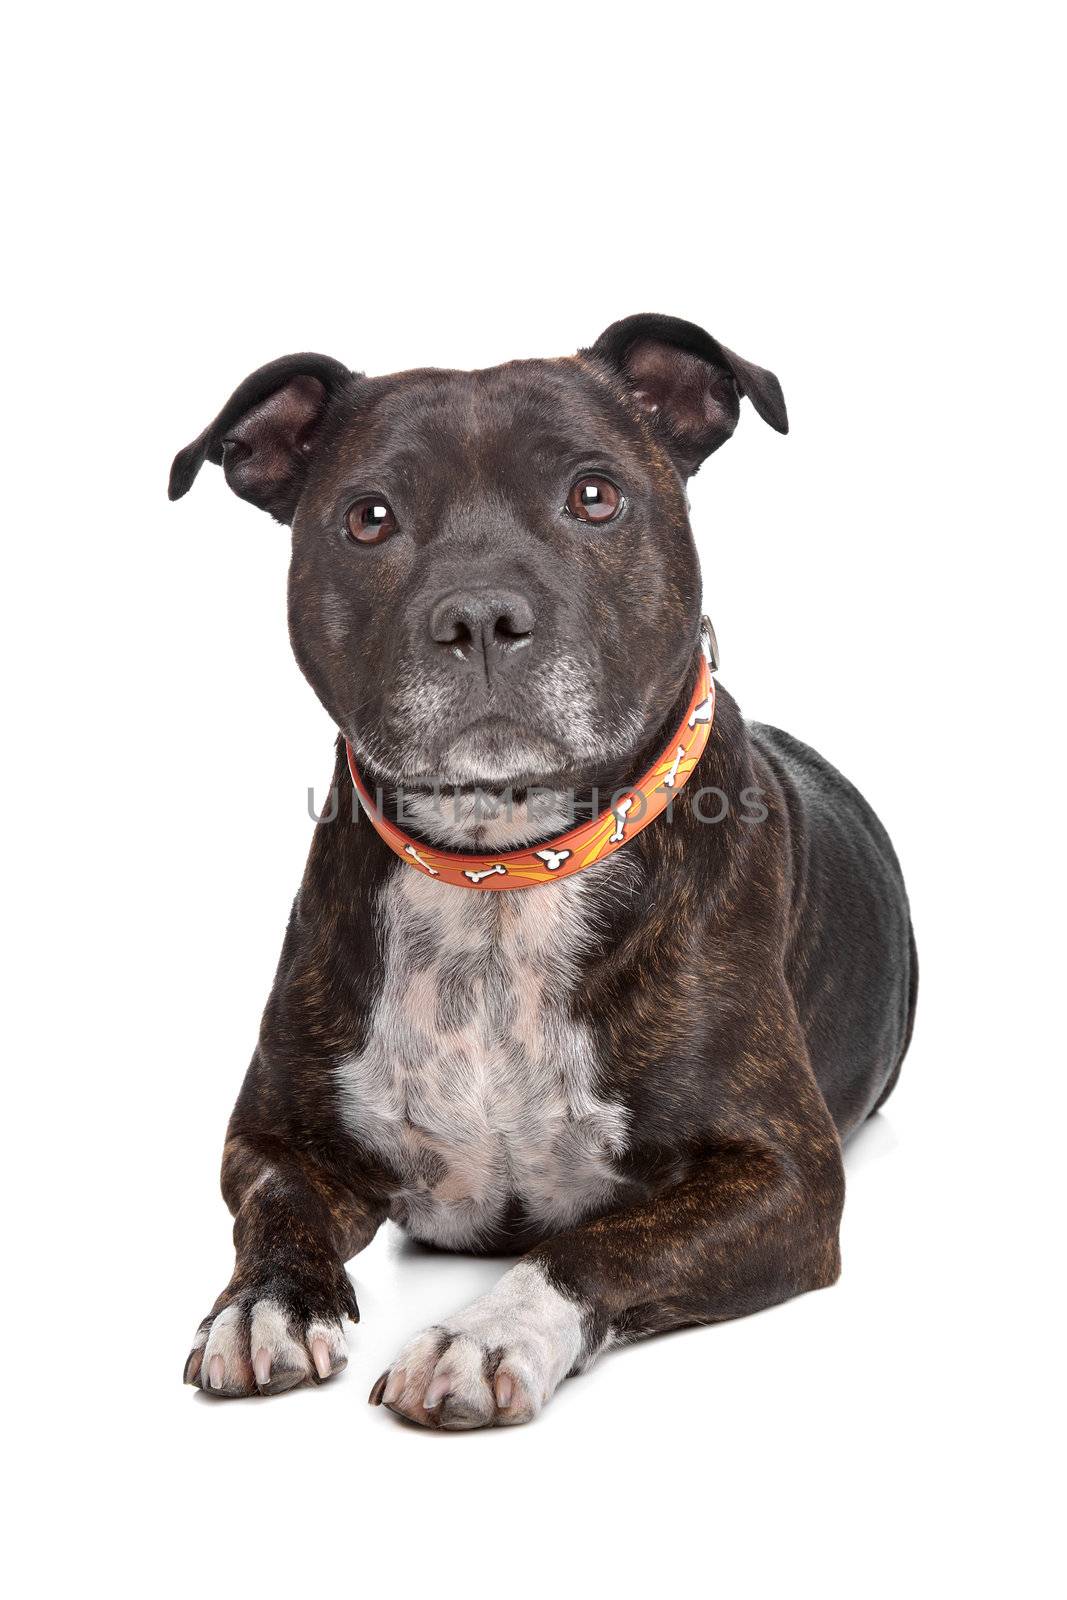 Staffordshire bull terrier in front of a white background